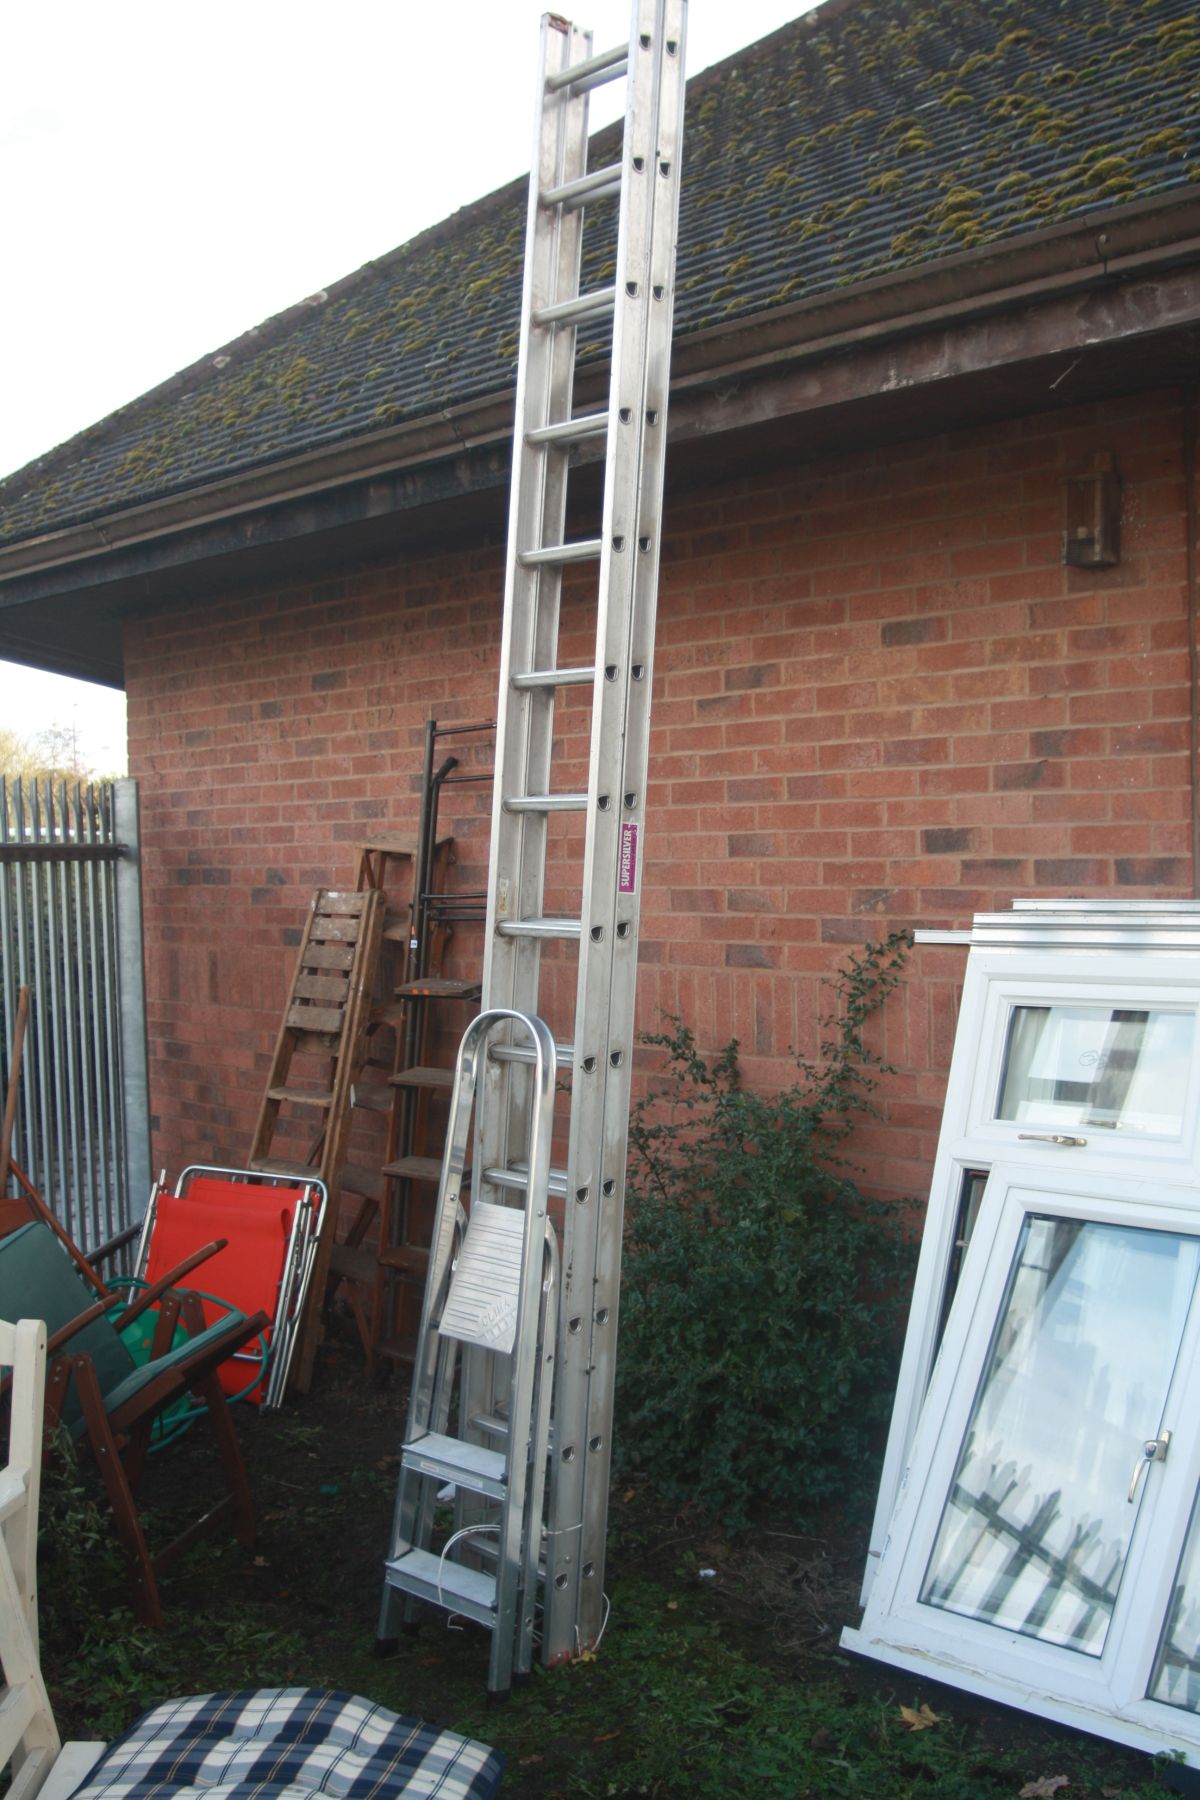 A SET OF TIMBALLOY 3.5M ALIMINIUM DOUBLE EXTENSION LADDERS together with a set of small step